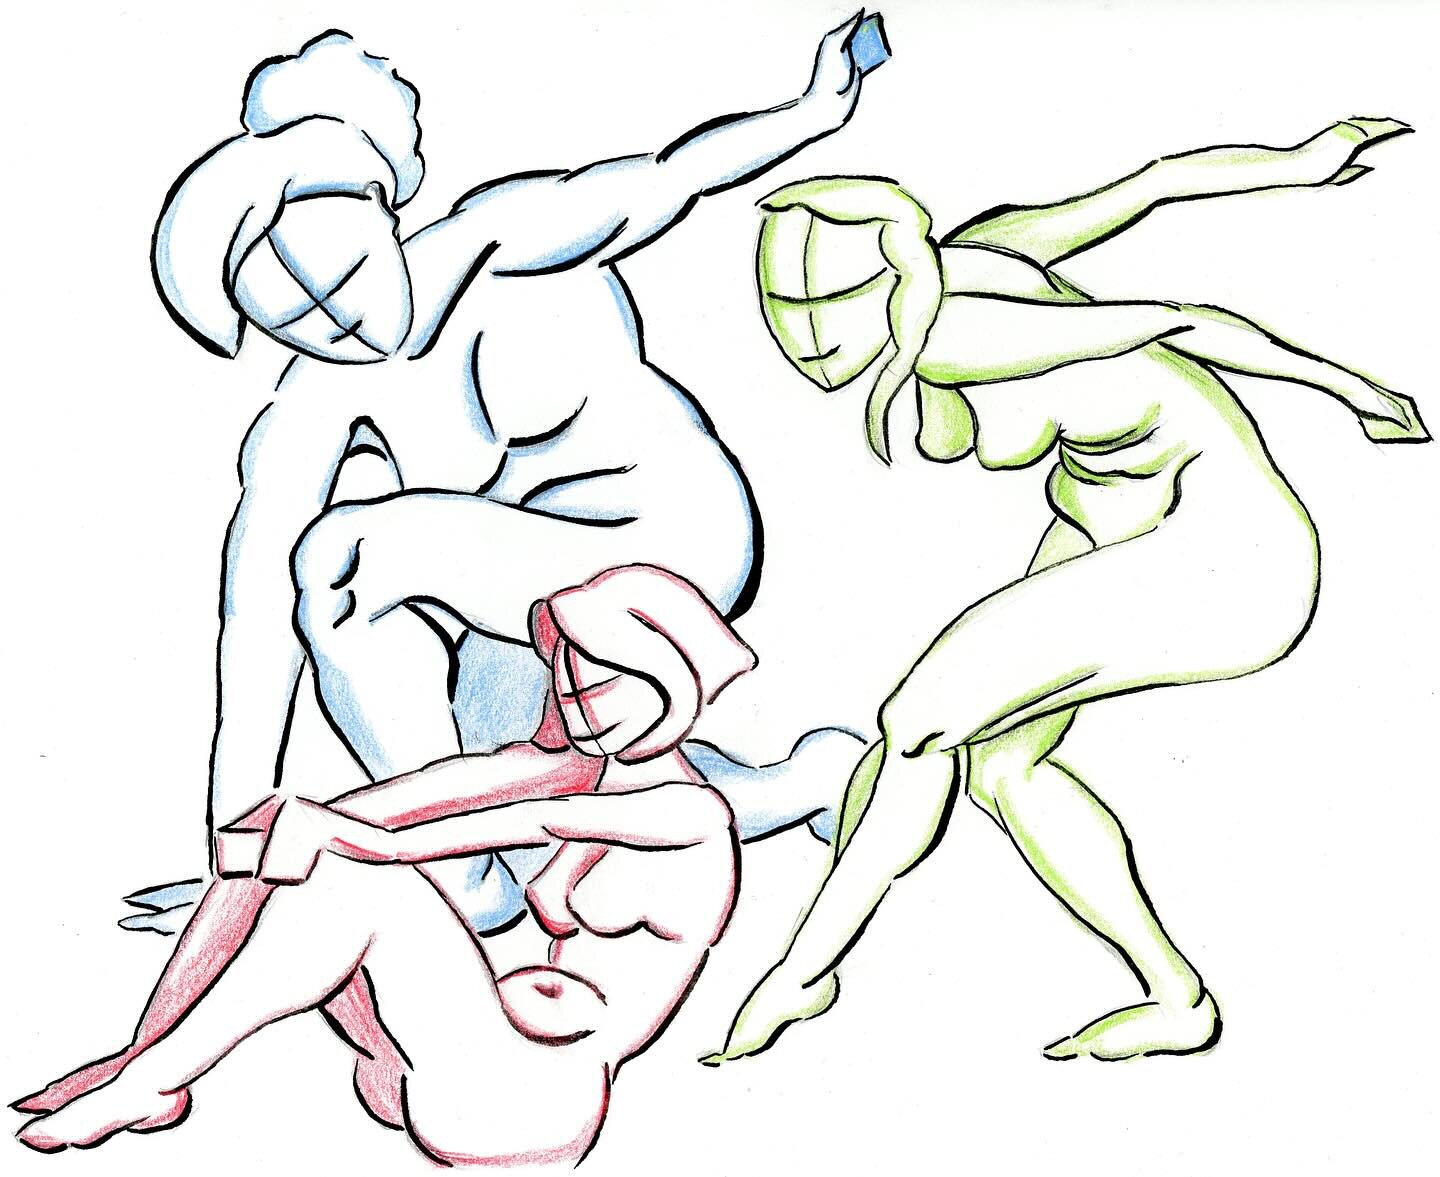 Join us the last Thursday of every month for life drawing! The next session is this Thursday, March 28 at Art Bias. Doors open at 6:30 PM, first pose at 7:00 PM
Bring your own supplies. Dry and non-toxic materials please.

Fee: $20, pay at the door

